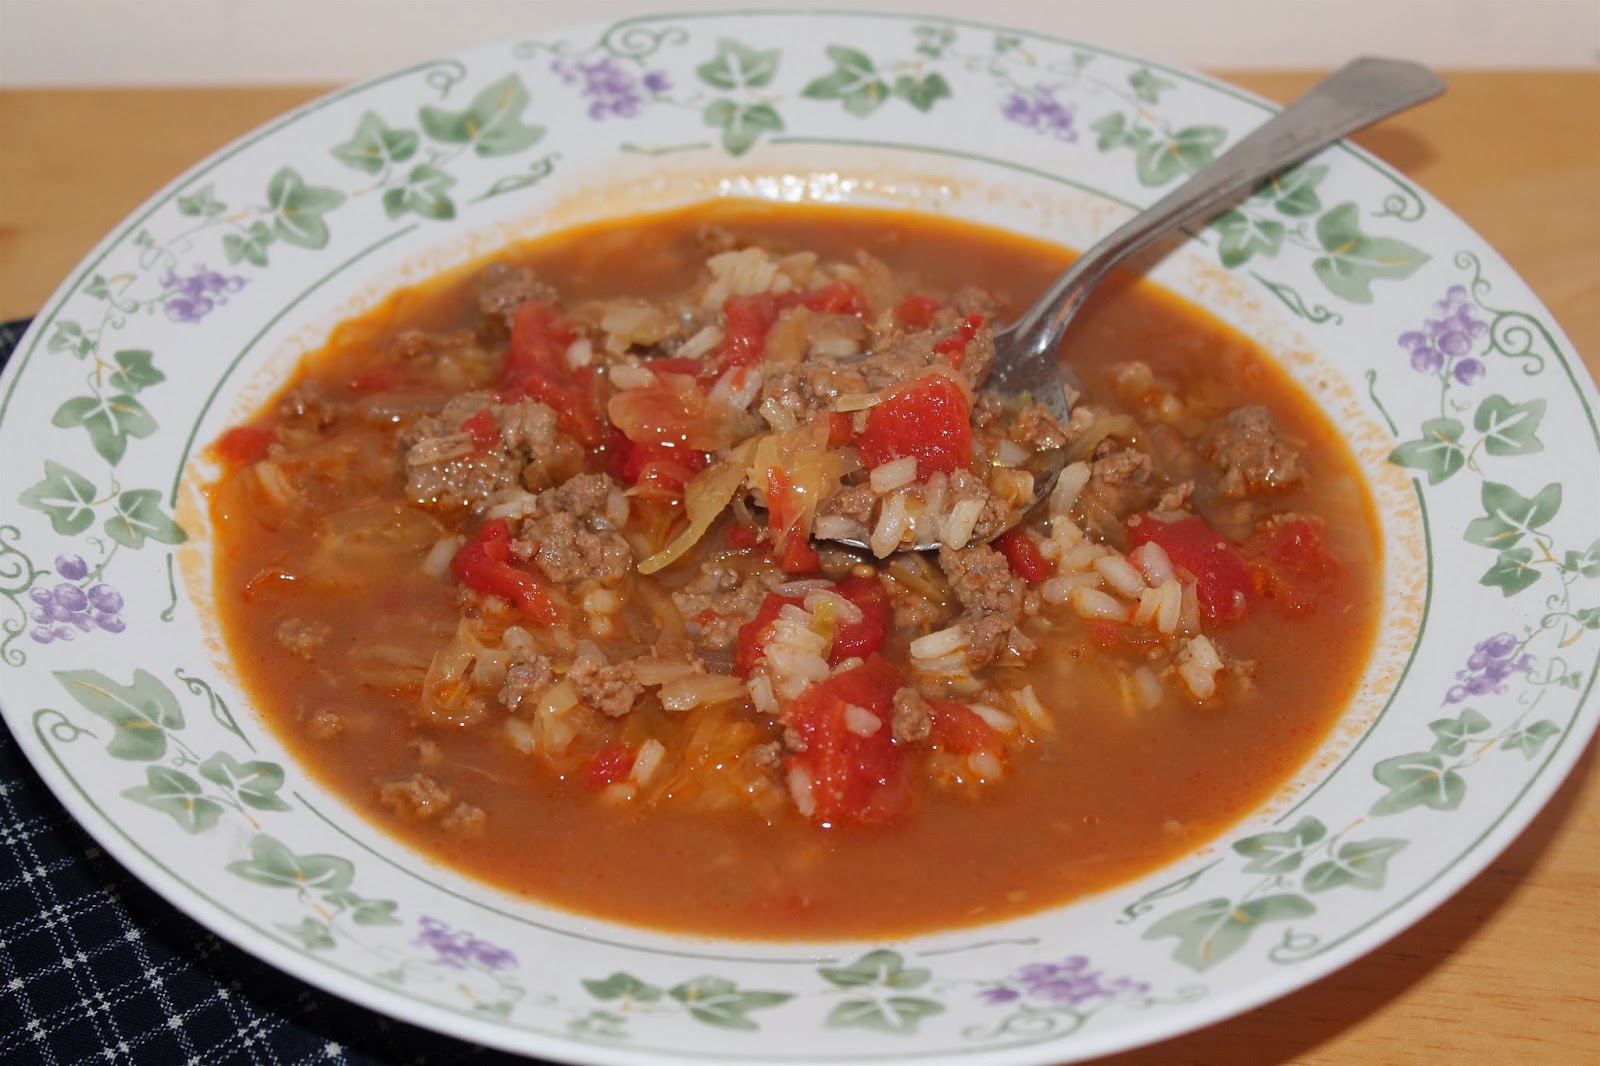 Savory Moments: Cabbage roll soup